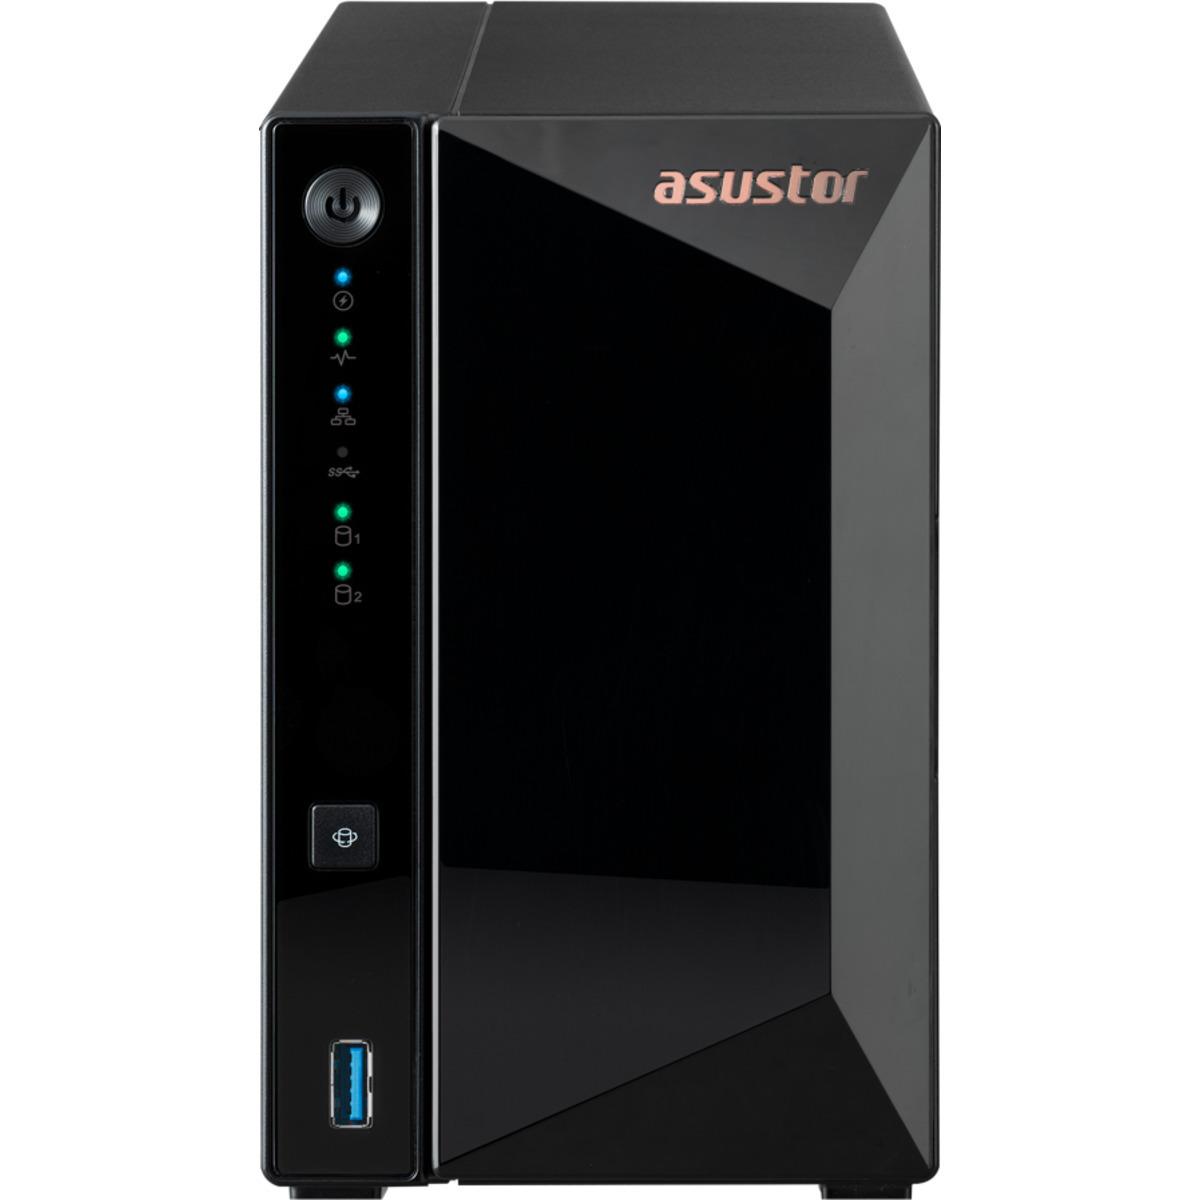 ASUSTOR DRIVESTOR 2 Pro AS3302T 28tb 2-Bay Desktop Personal / Basic Home / Small Office NAS - Network Attached Storage Device 2x14tb Seagate IronWolf Pro ST14000NT001 3.5 7200rpm SATA 6Gb/s HDD NAS Class Drives Installed - Burn-In Tested DRIVESTOR 2 Pro AS3302T